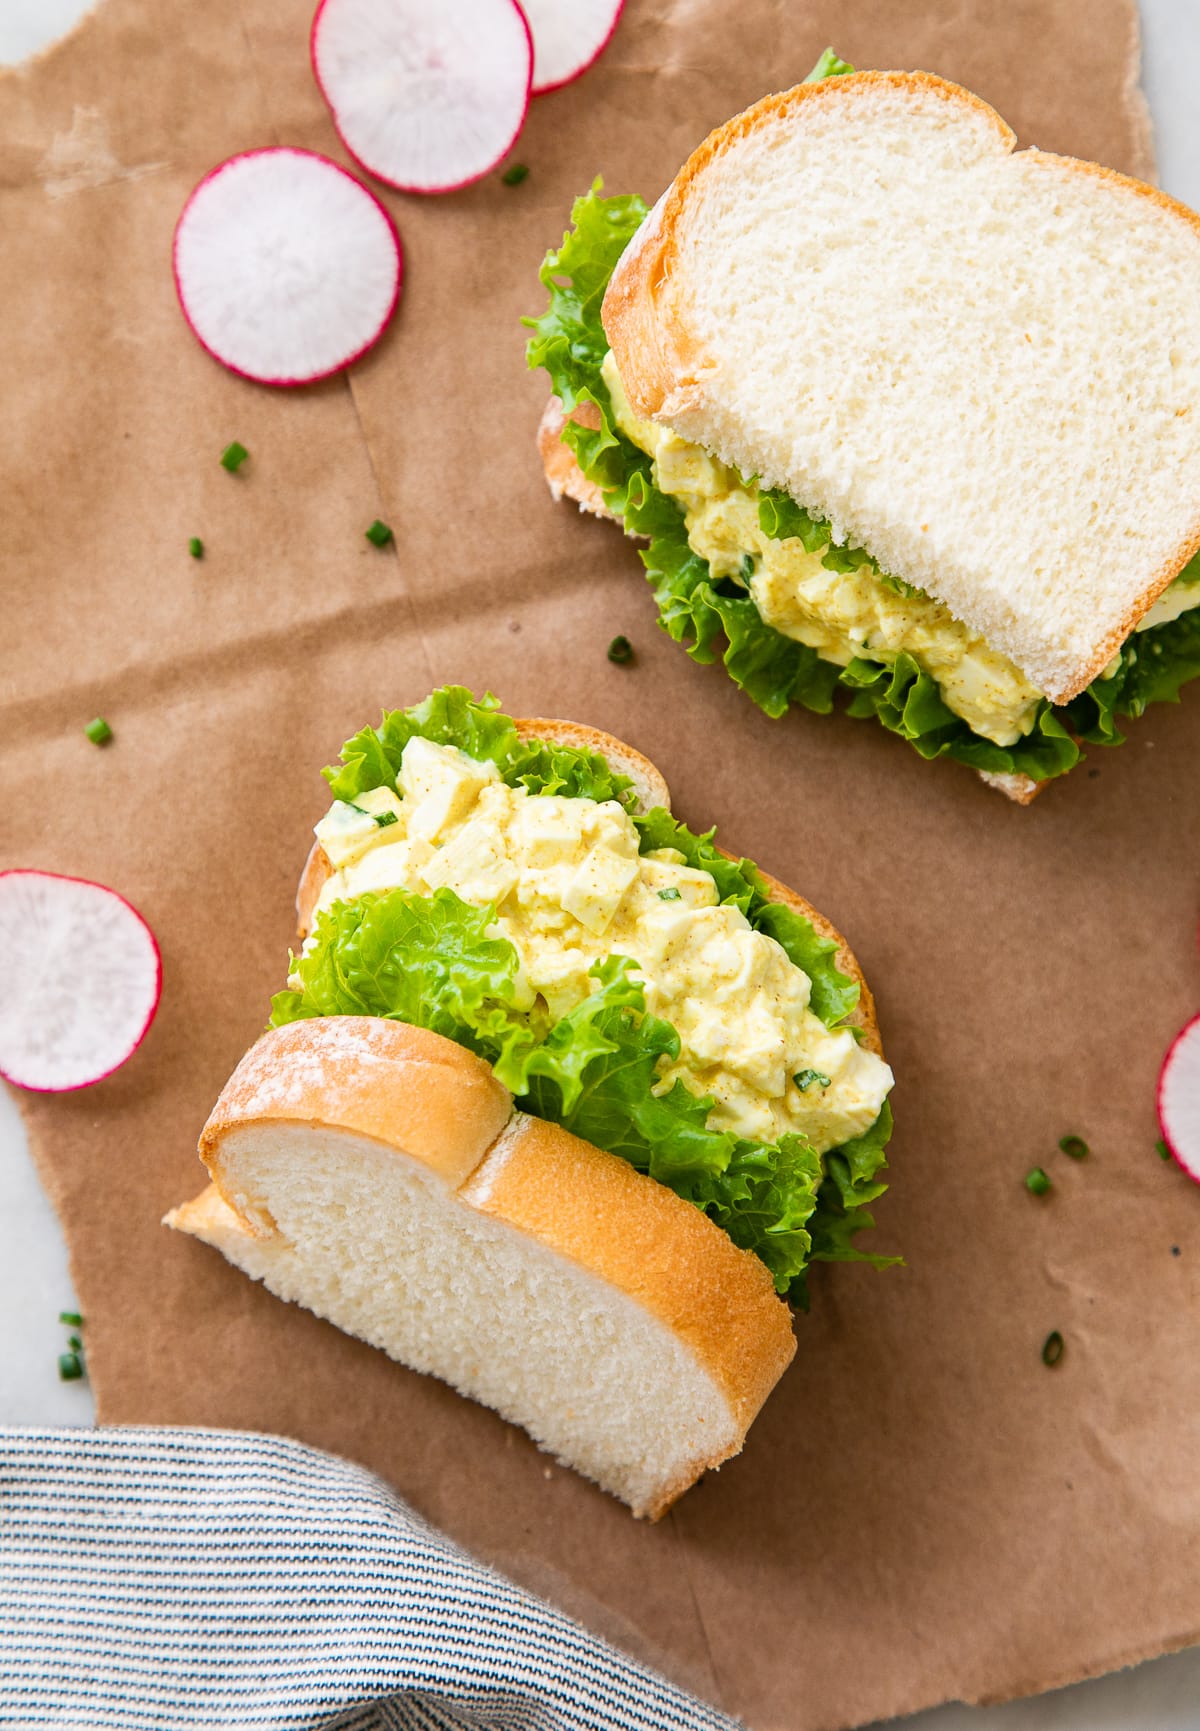 top down view of two halves of vegan egg salad sandwich on brown paper with items surrounding.